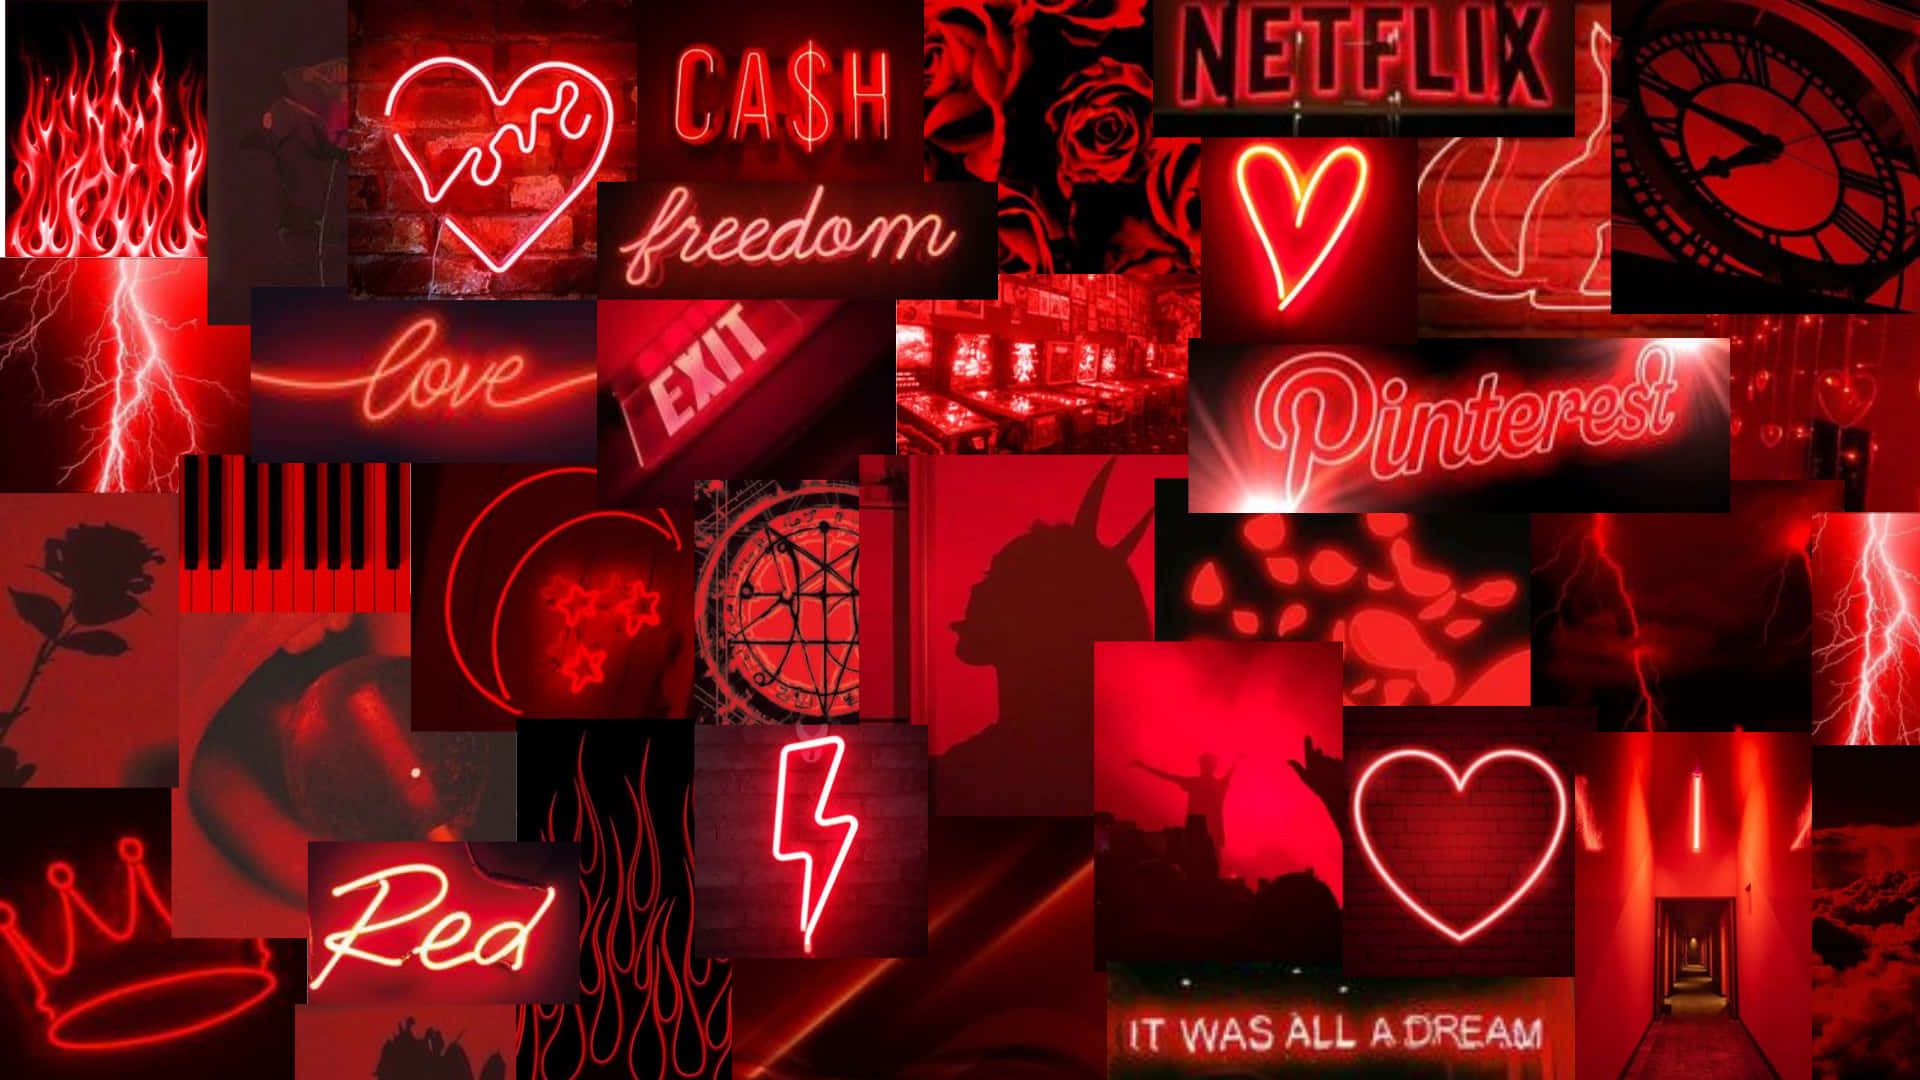 Free Neon Red Aesthetic Wallpaper Downloads, Neon Red Aesthetic Wallpaper for FREE